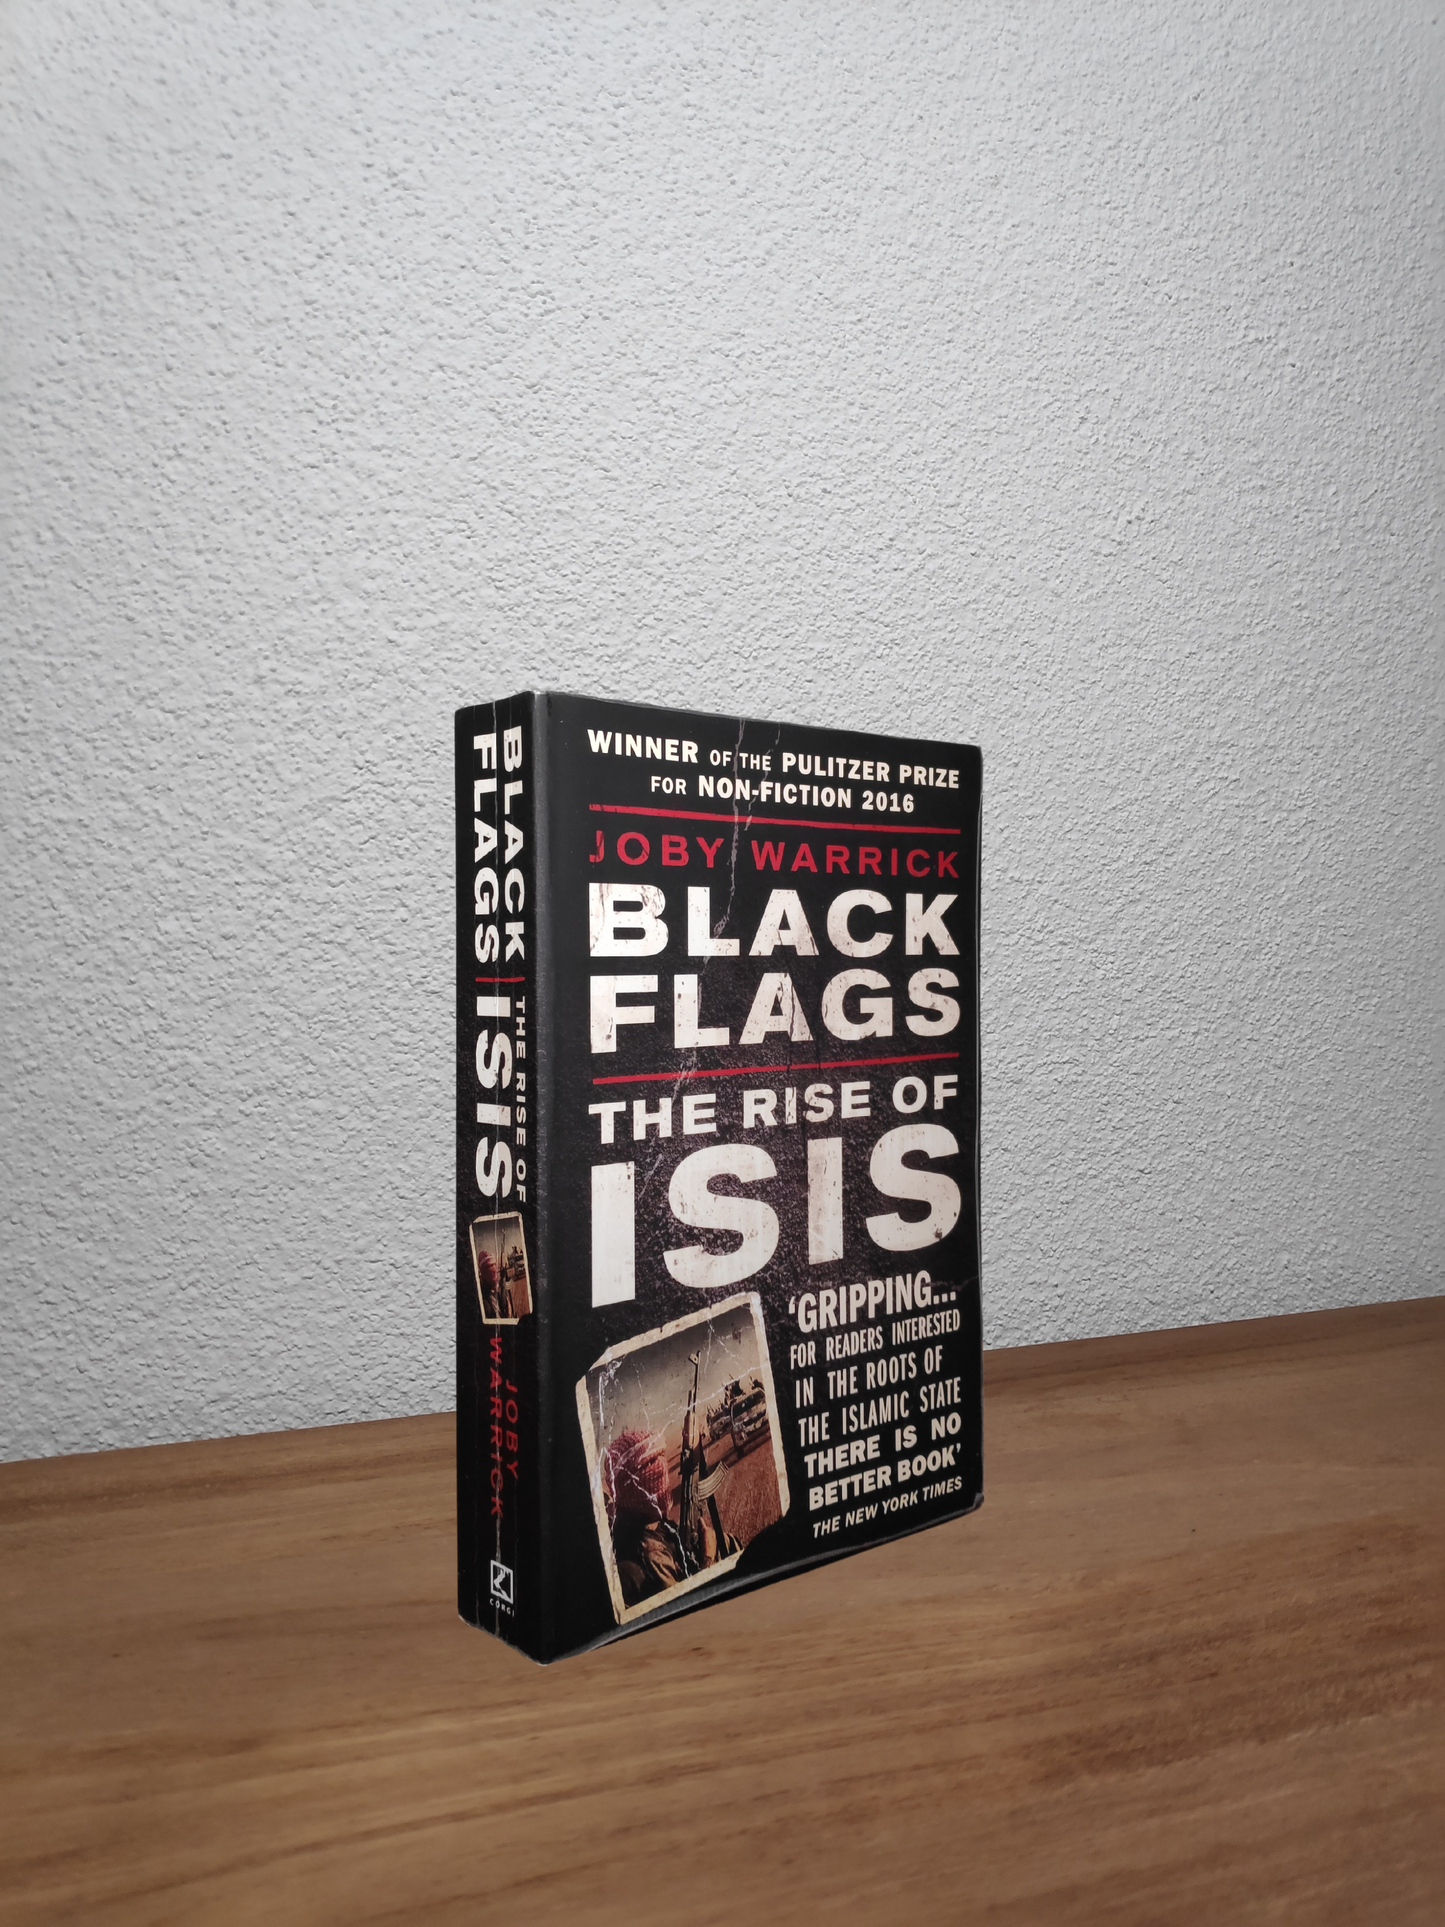 Joby Warrick - Black Flags, The Rise of ISIS - Second-hand english book to deliver in Zurich & Switzerland